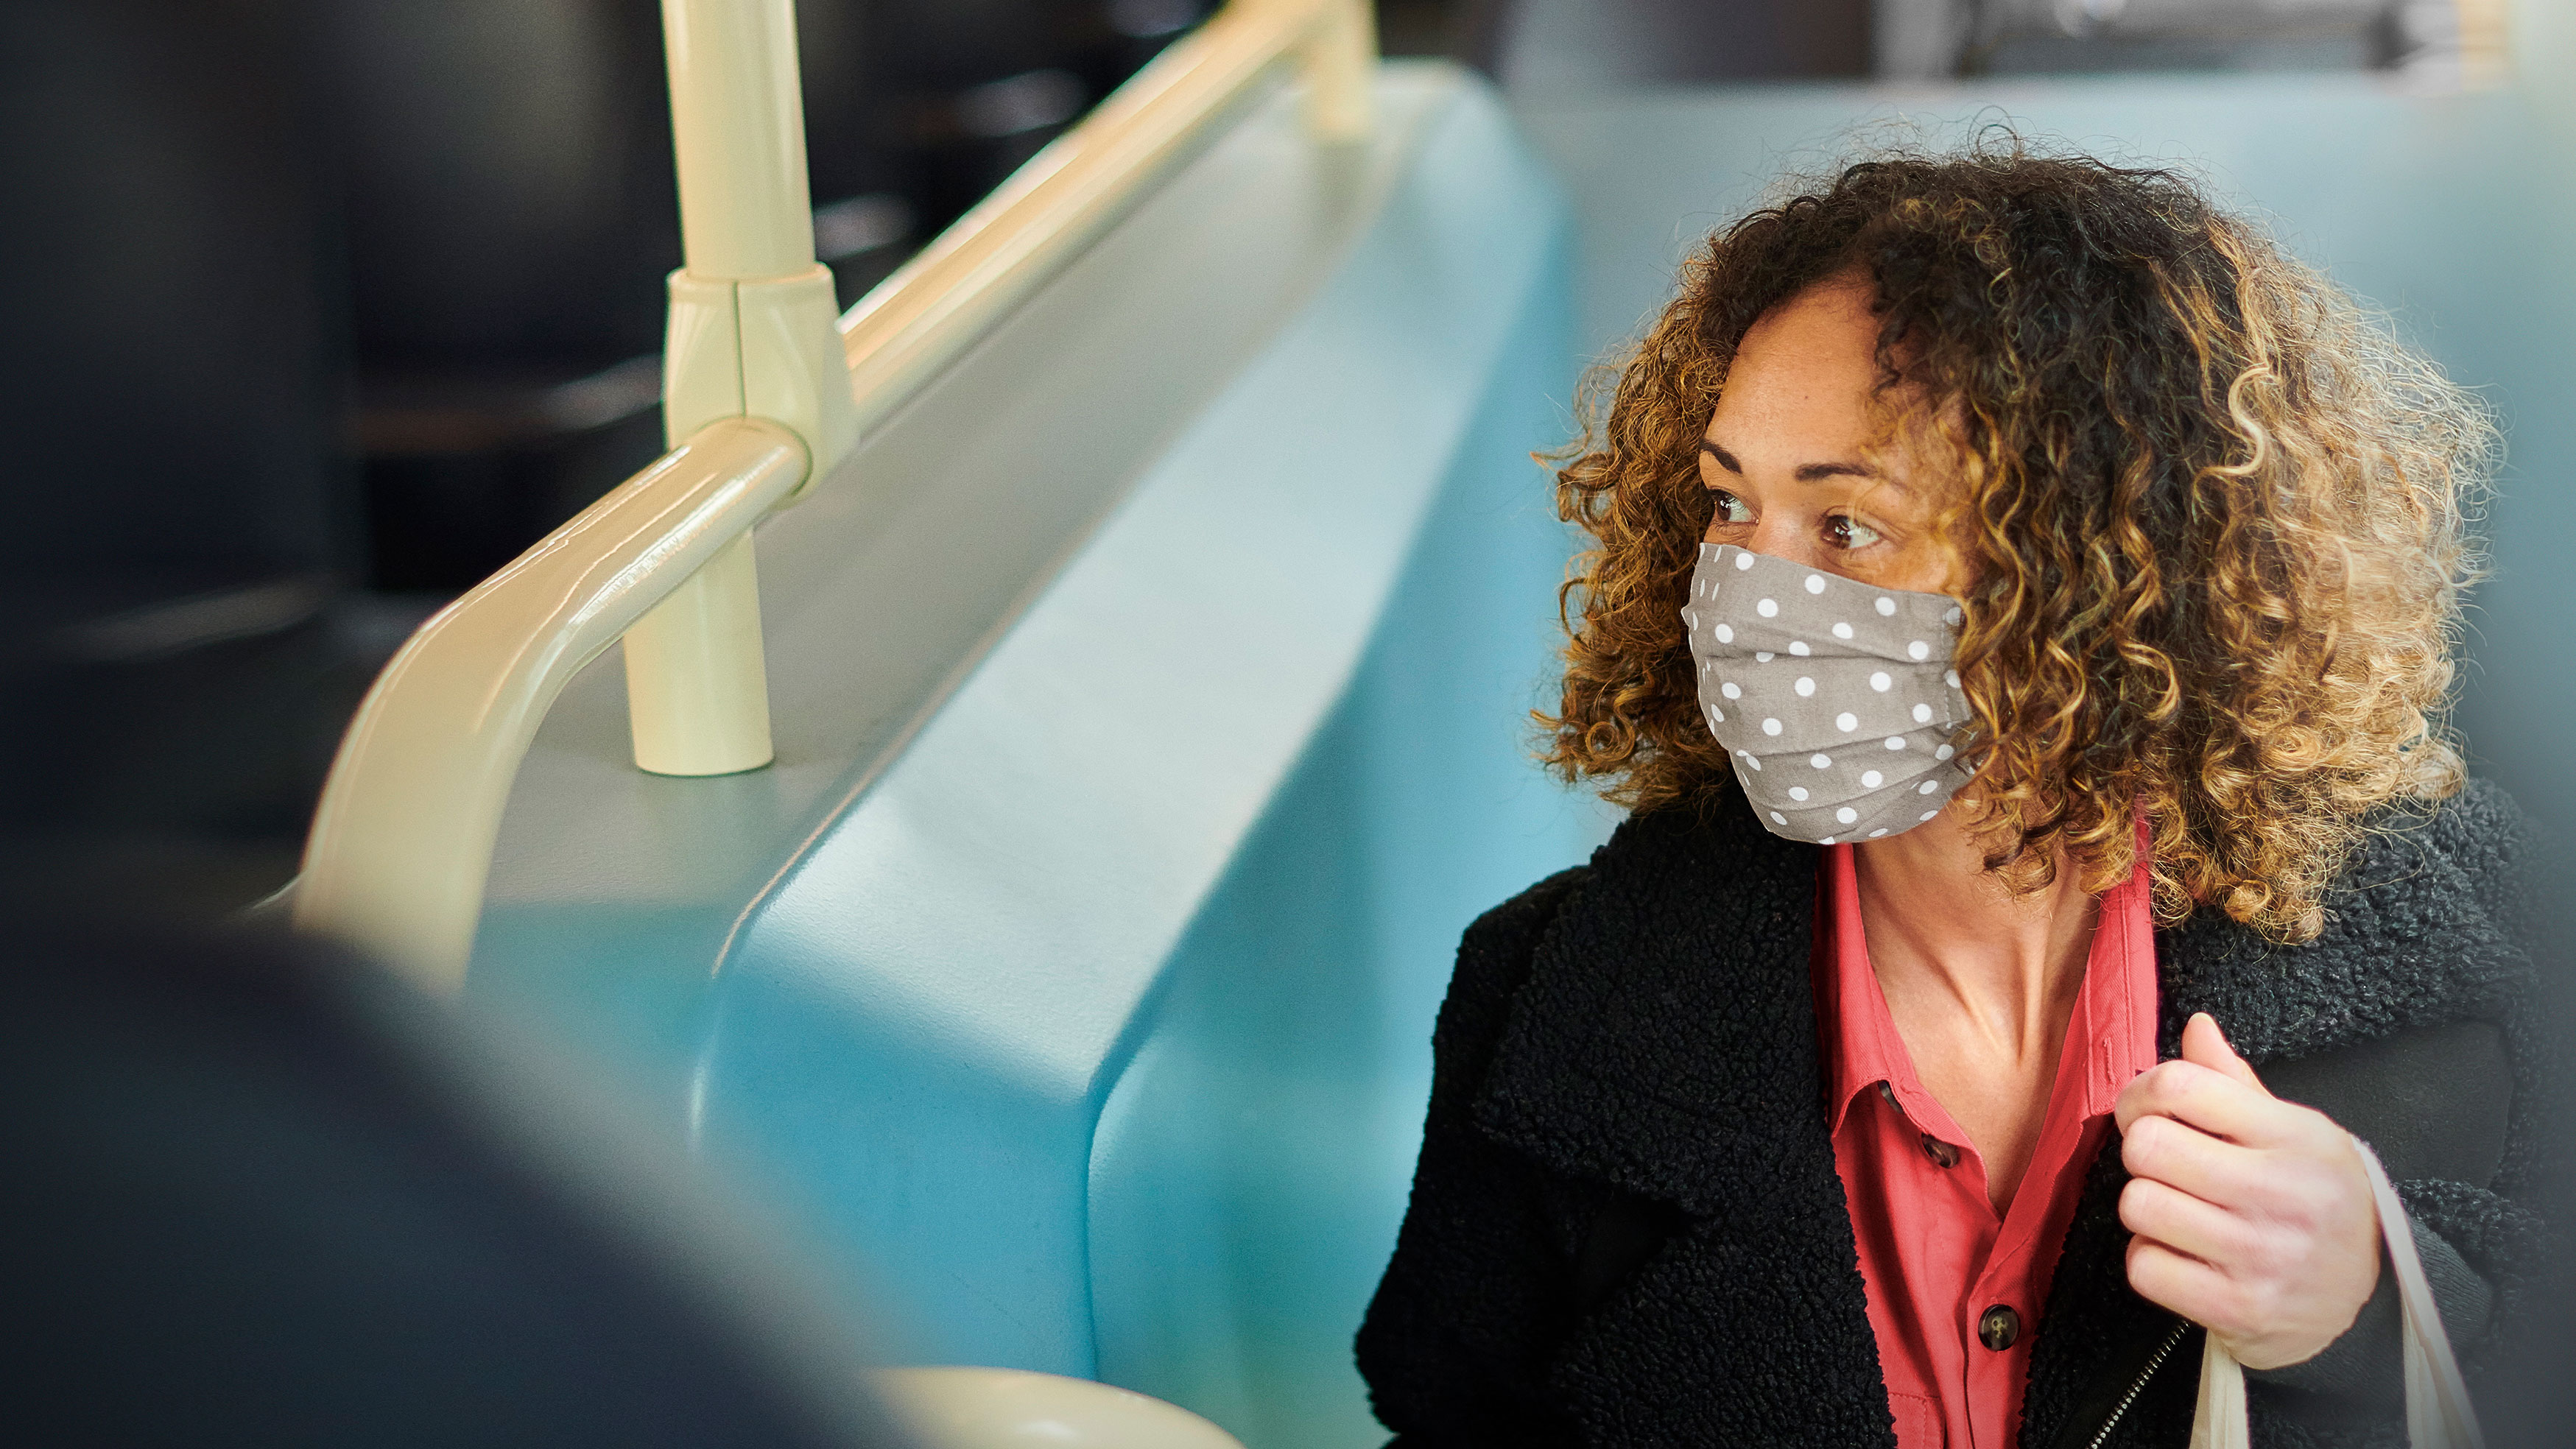 A woman wearing a mask travelling on public transportation